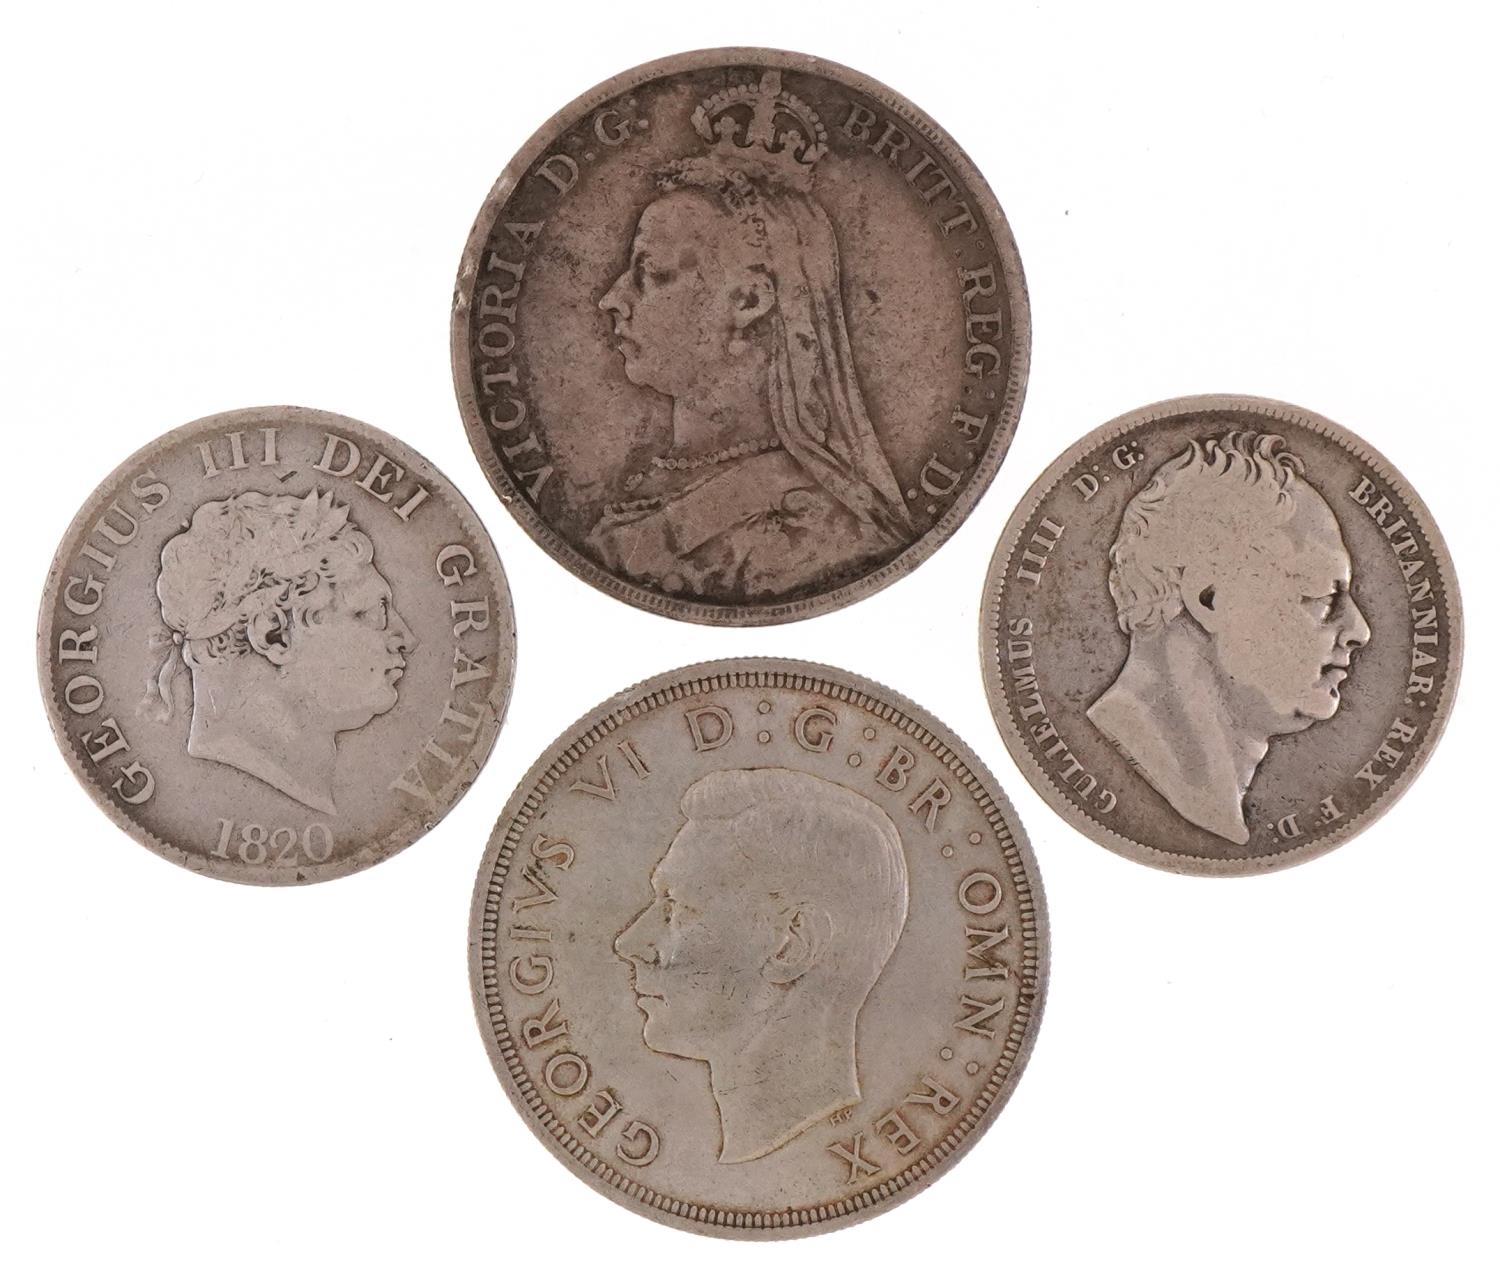 George III and later British coinage comprising two crowns dates 1891 and 1937 and two half crowns